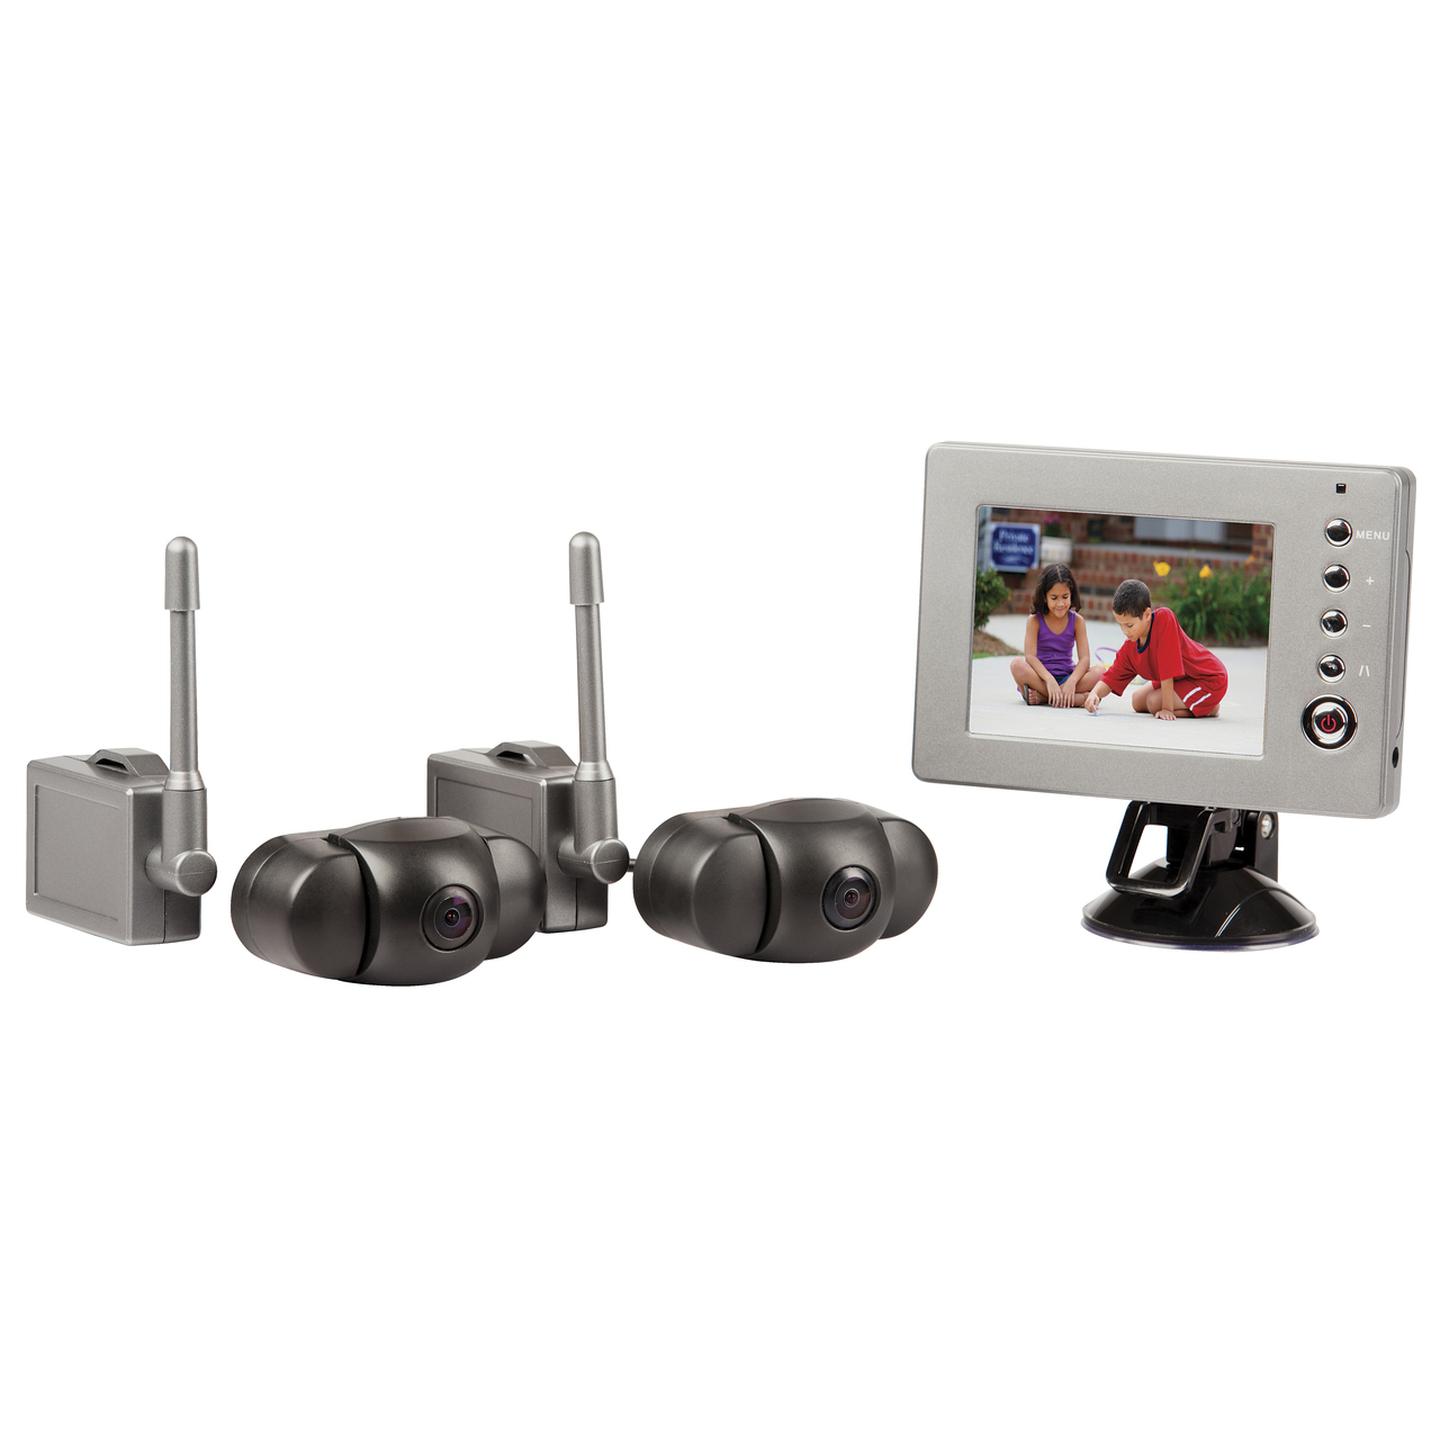 Wireless 2.4GHz Reversing Cameras and LCD Monitor Kit - 2 Cameras